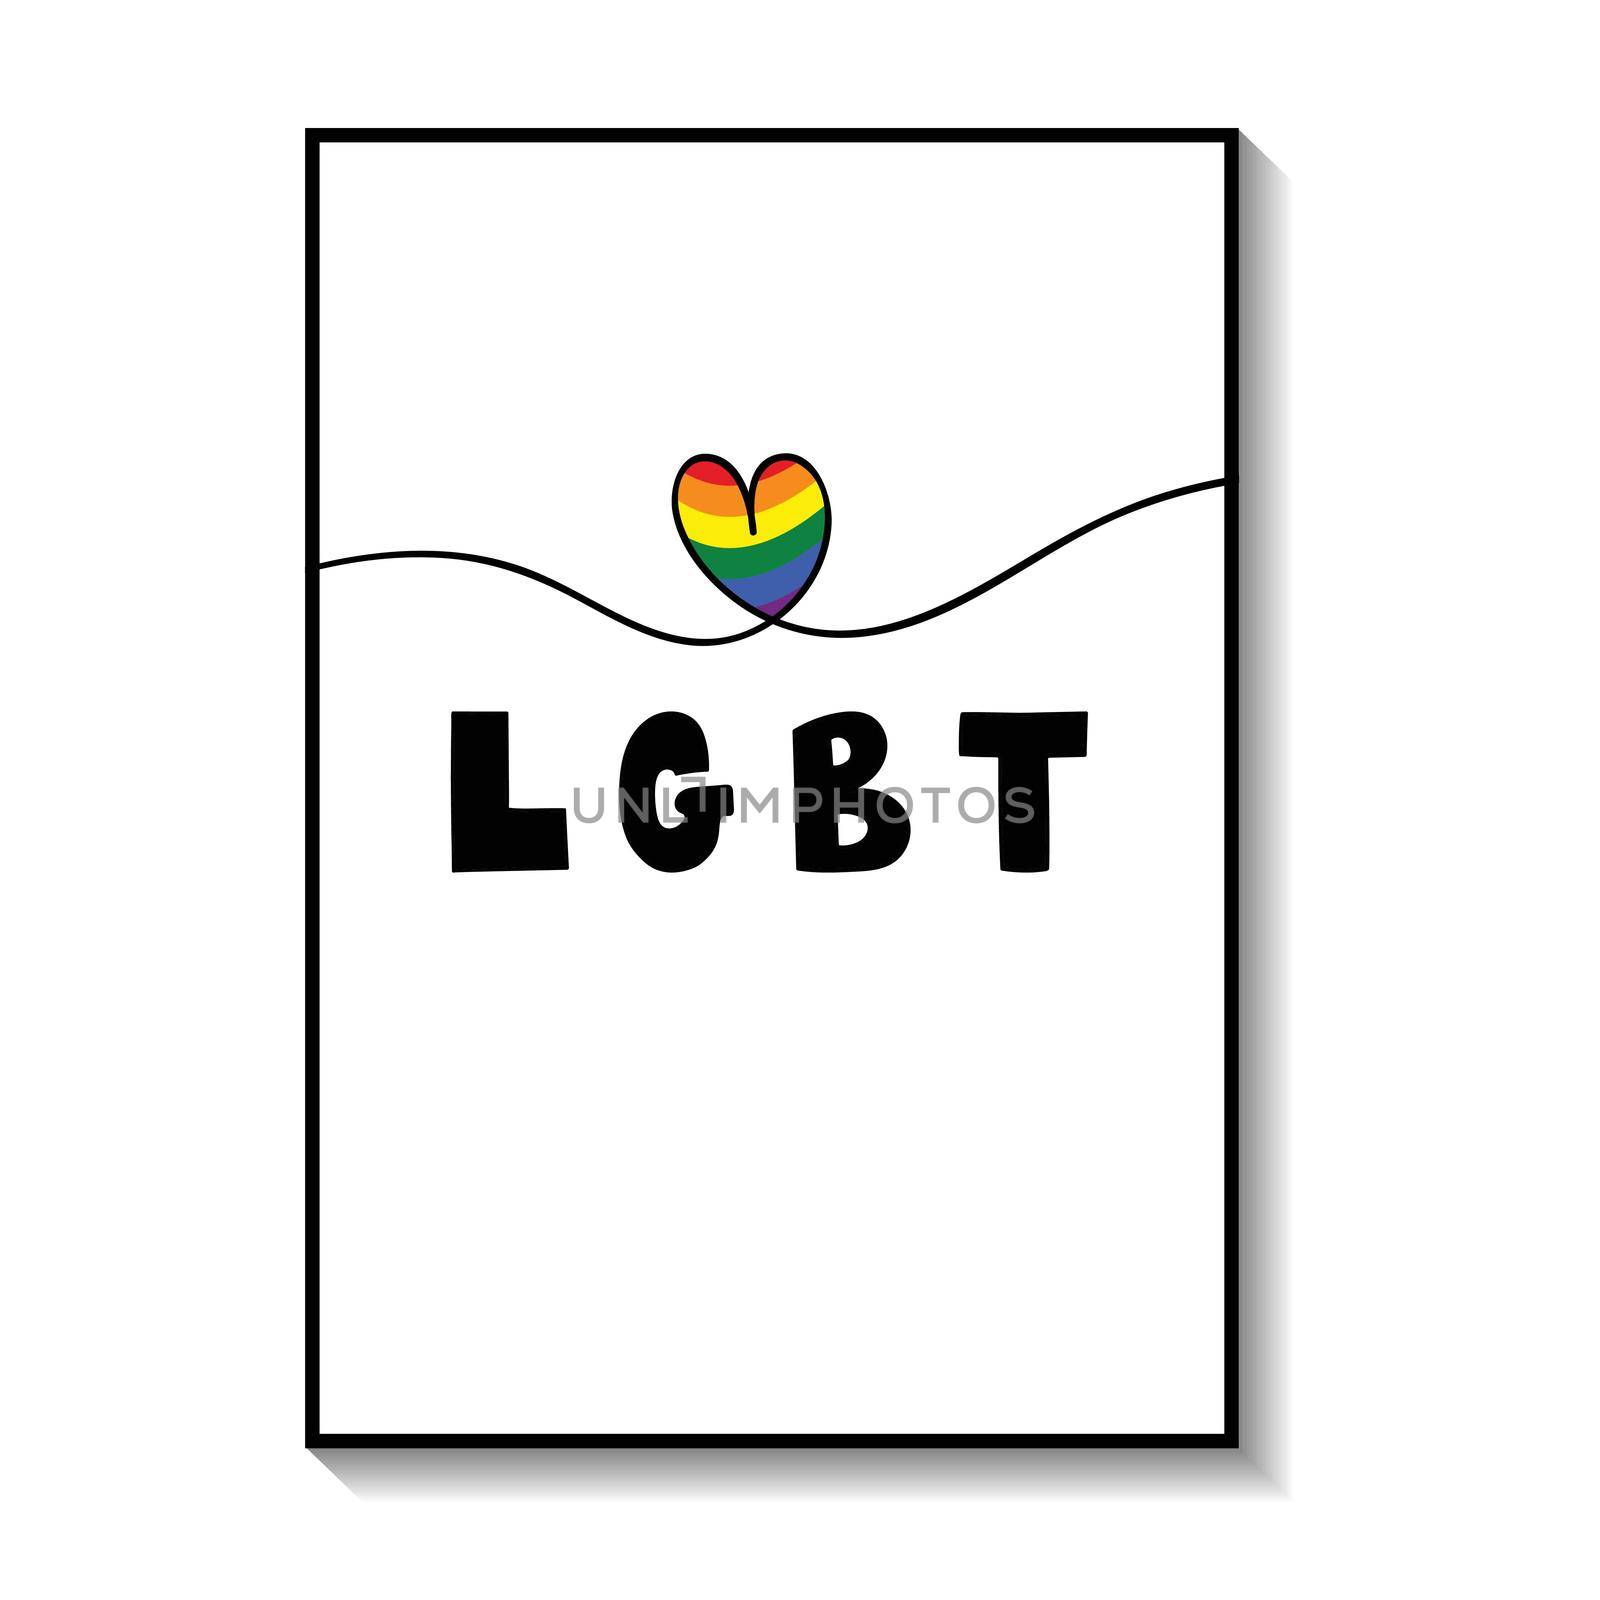 Gay pride month poster collection, banner. Lettering LGBT, hearts, colorful symbols, LGBT icons. Template design, vector illustration. Love wins. Geometric shapes in the colors on the rainbow.